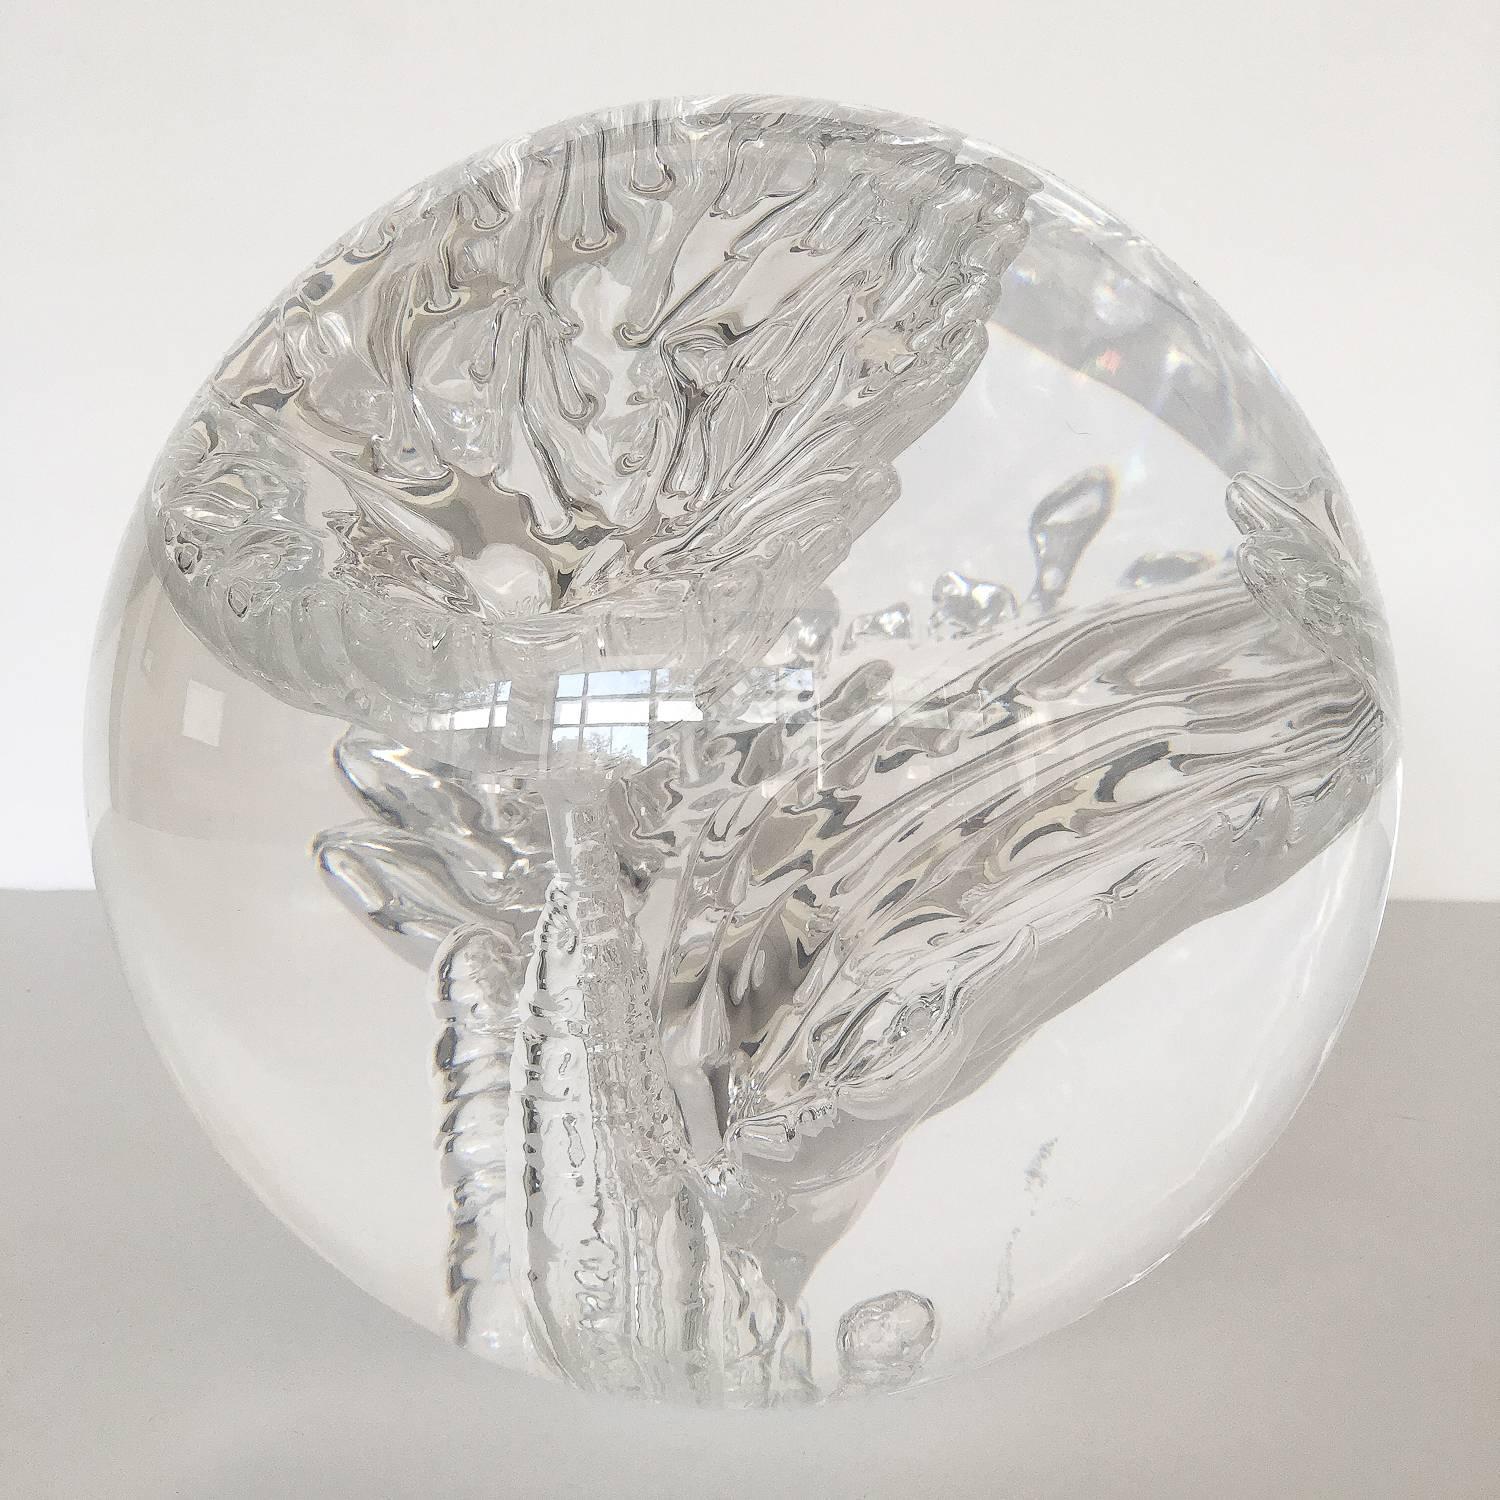 Mid-Century Modern Lucite Sphere Sculpture with Suspended Bubble Inclusions